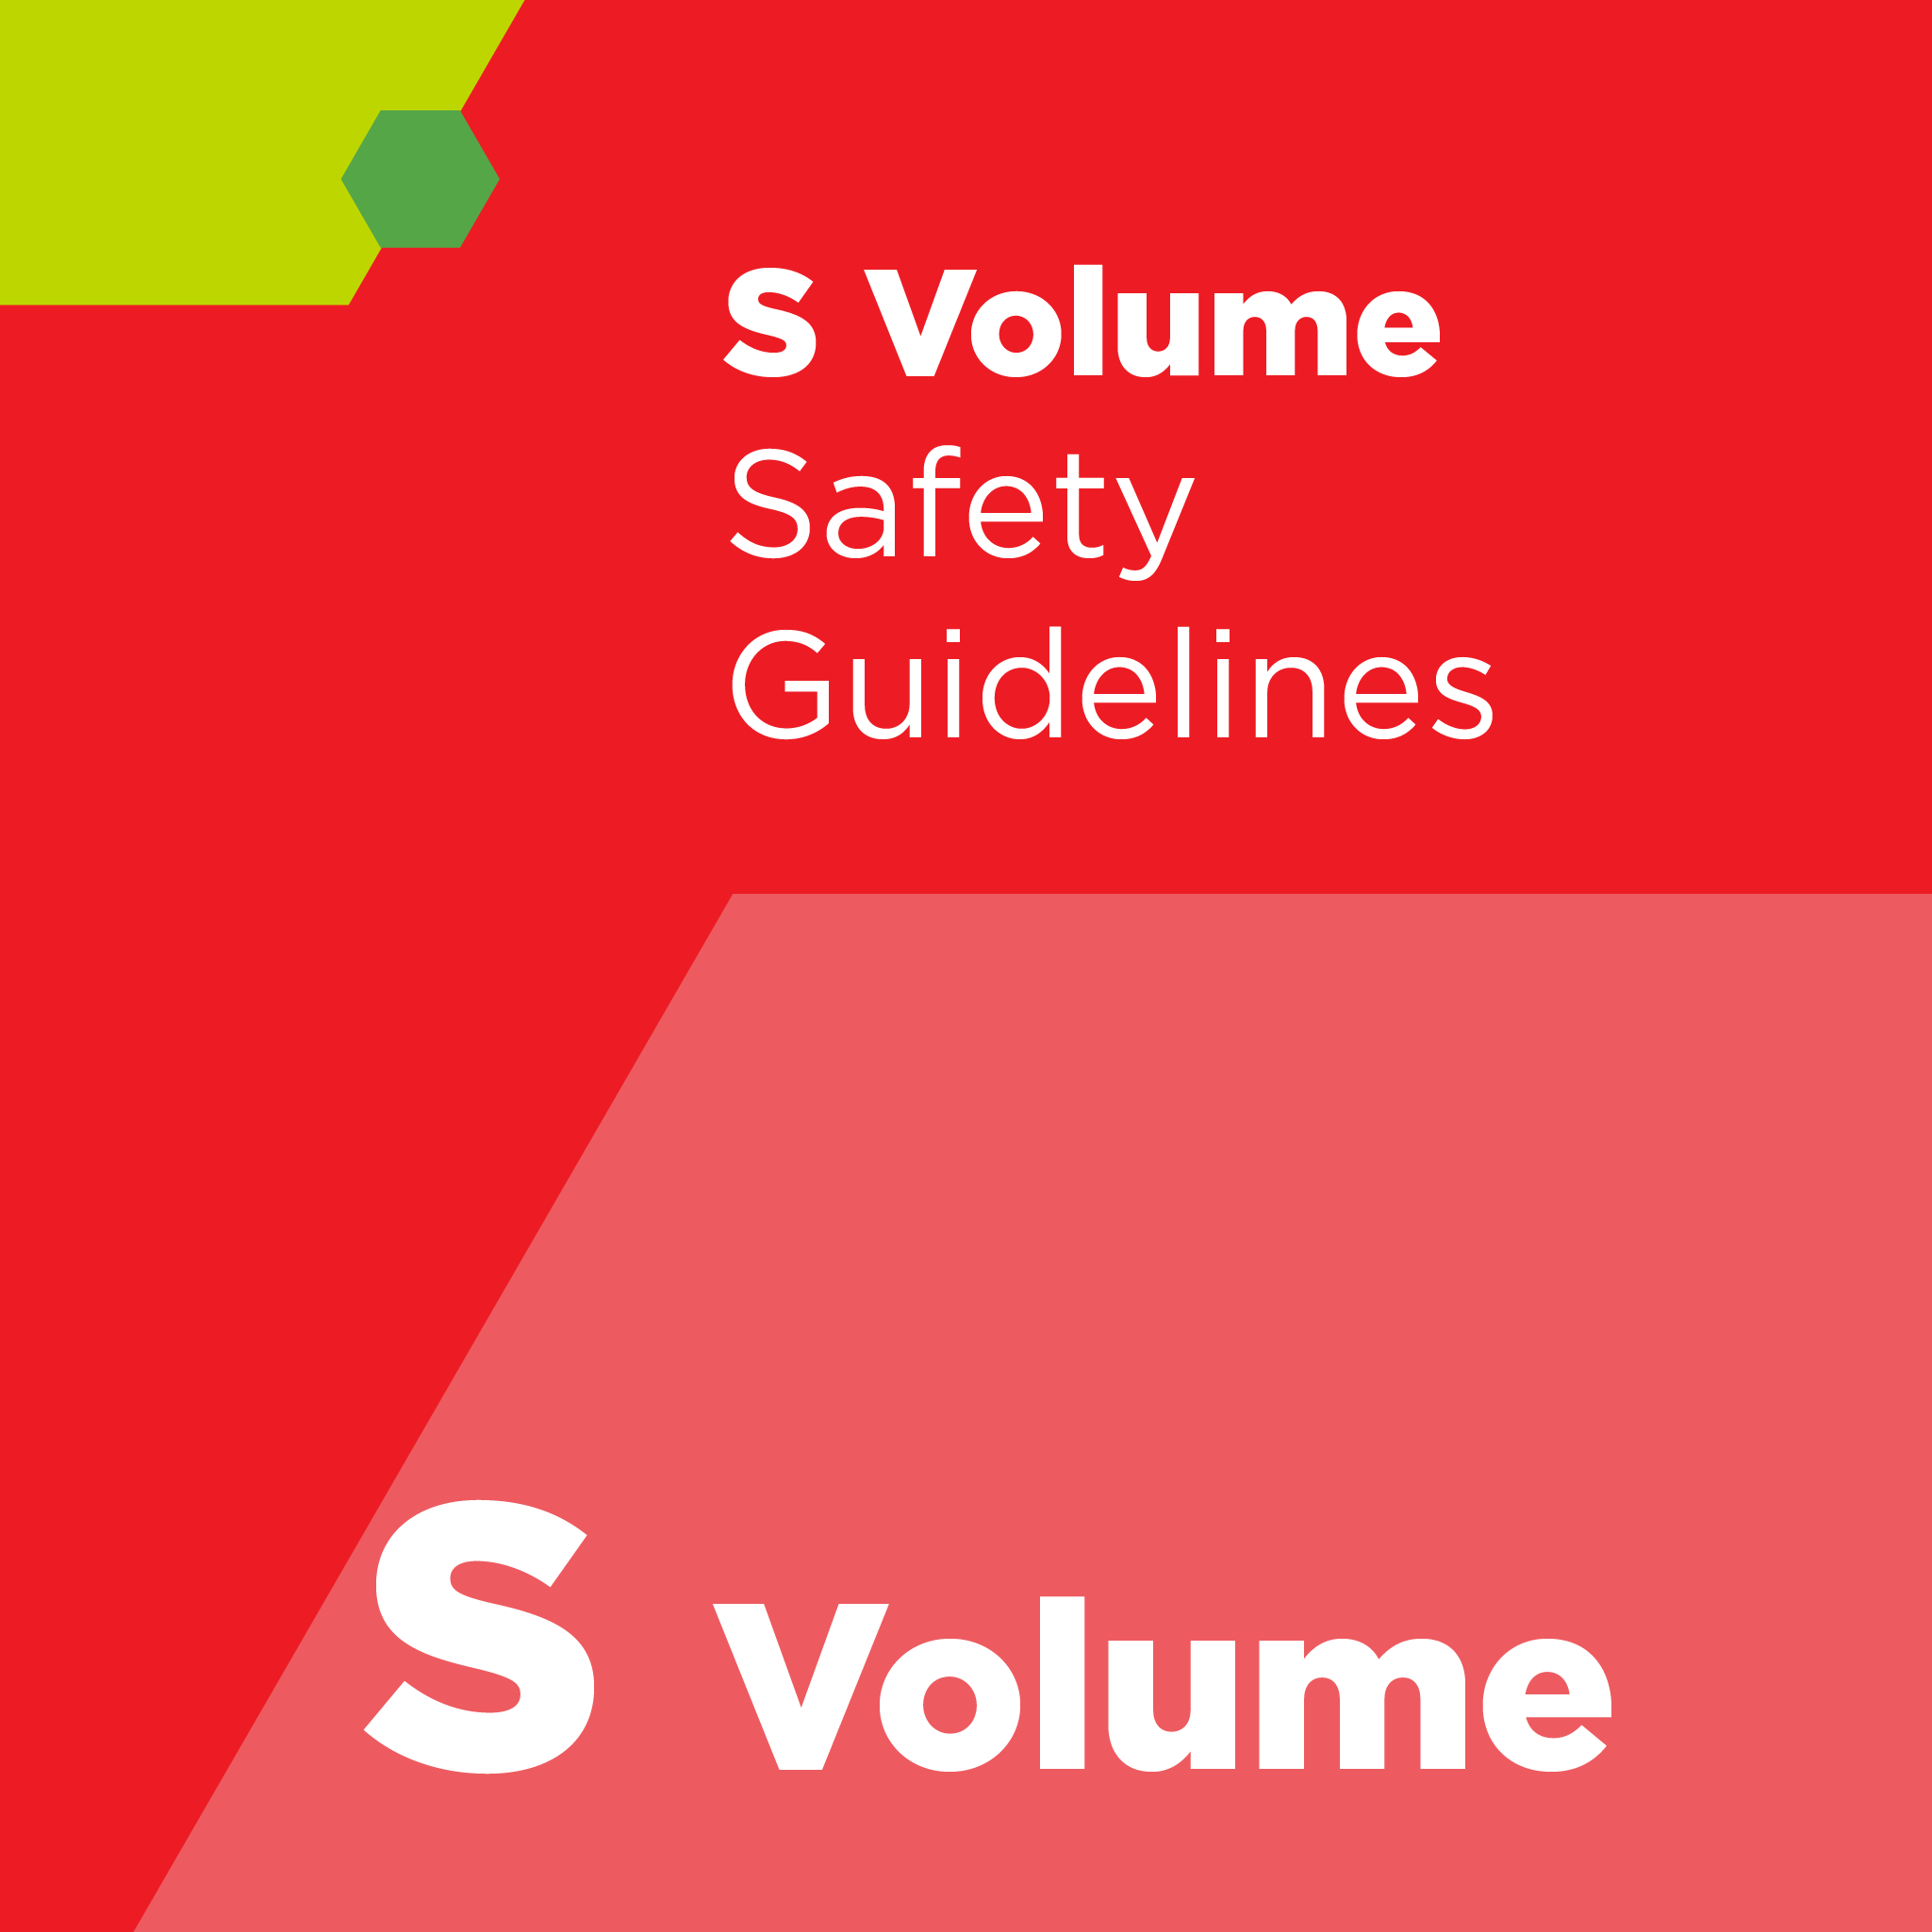 S00800 - SEMI S8 - Safety Guideline for Ergonomics Engineering of Semiconductor Manufacturing Equipment